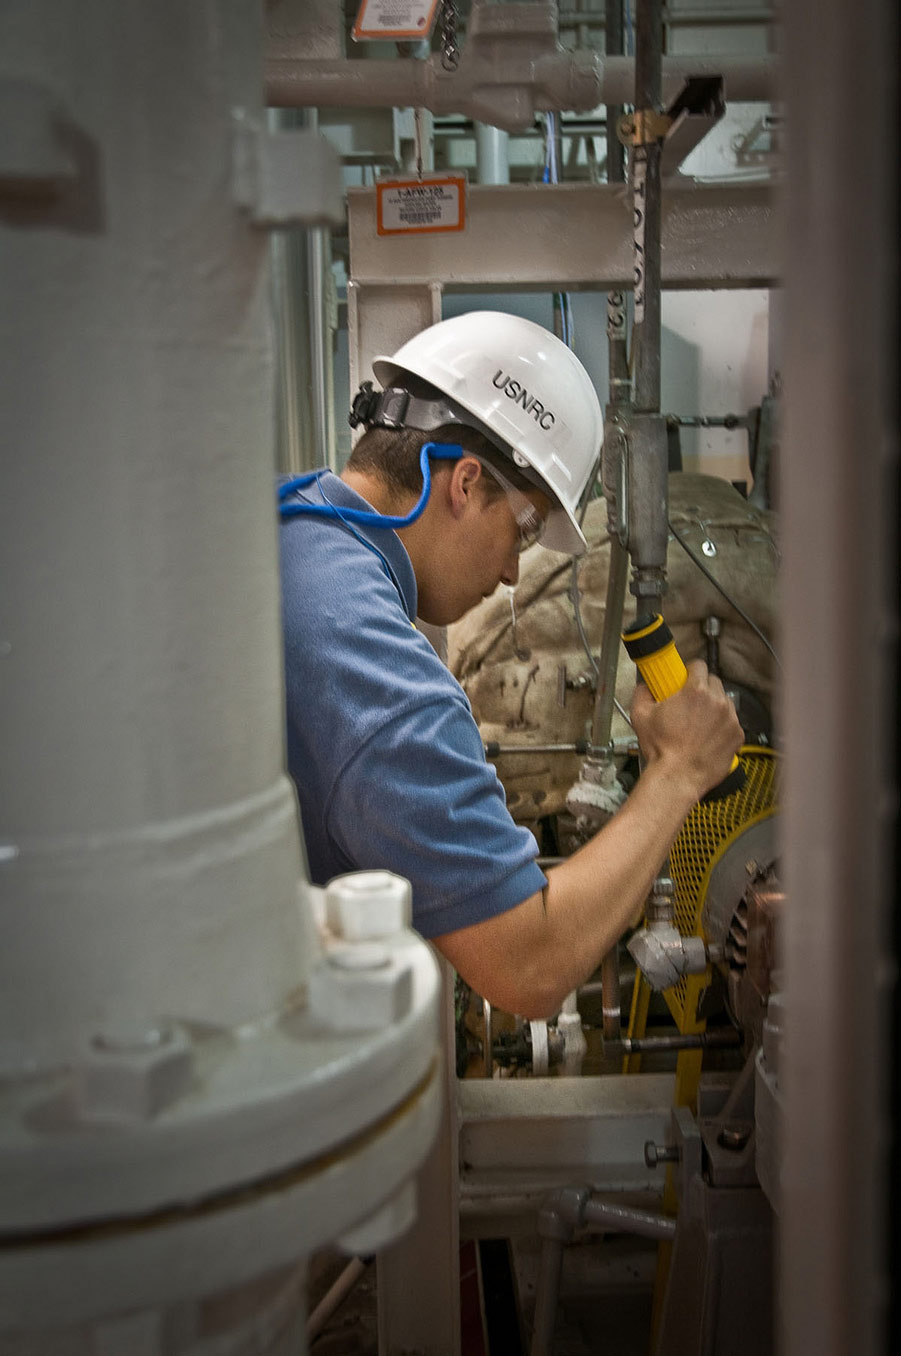 NRC Resident Inspectors perform Inspections at the Nuclear Power Plants by Nuclear Regulatory Commission, used under CC BY 2.0